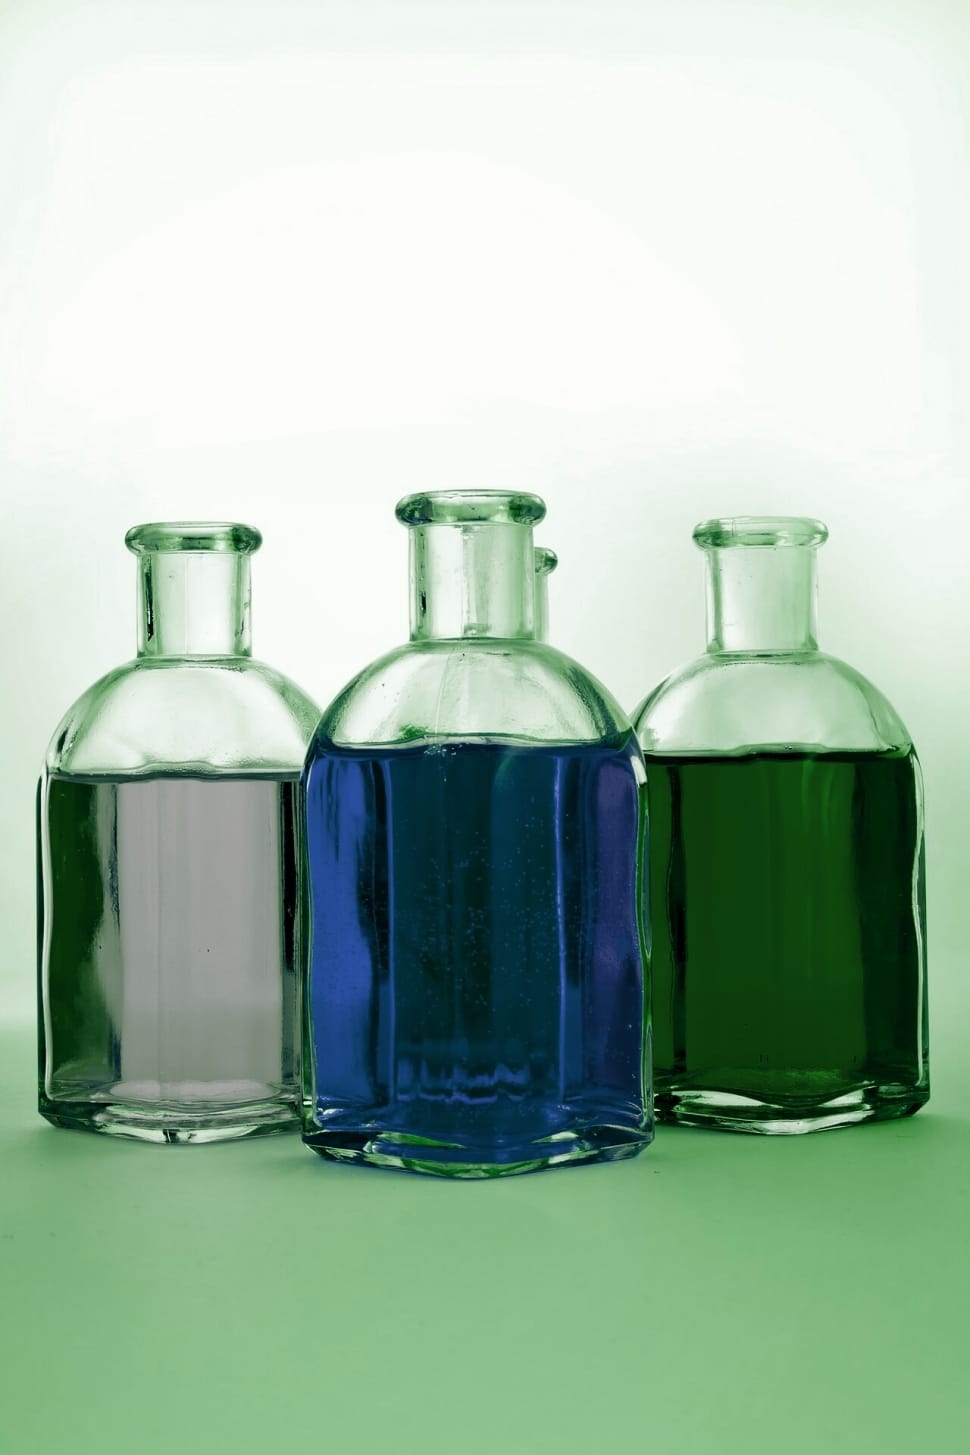 3 clear glass bottles preview